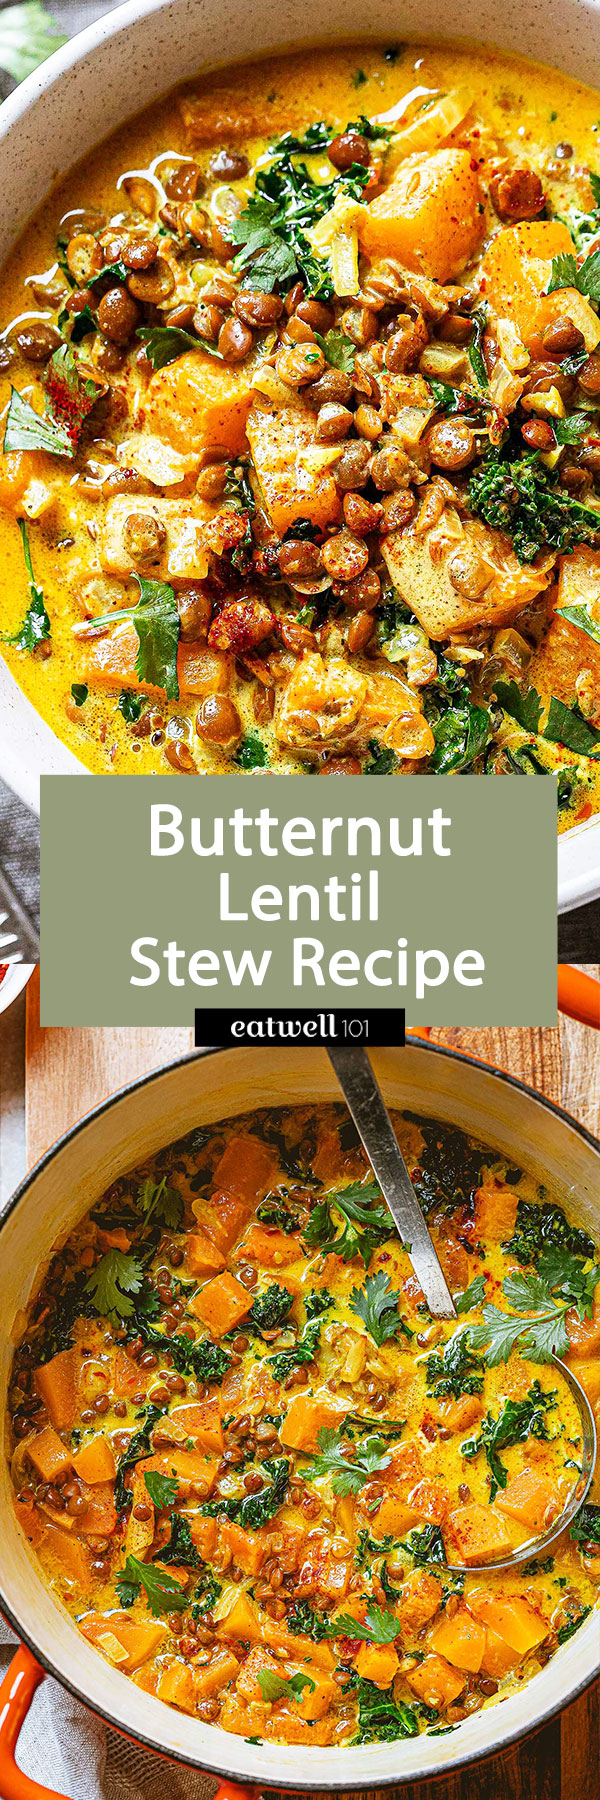 Coconut Butternut and Lentil Stew Recipe - #butternut #stew #lentil #kale #recipe #eatwell101 - This Coconut Butternut and Lentil Stew is an excellent plant-based dinner for just about any night of the week! 